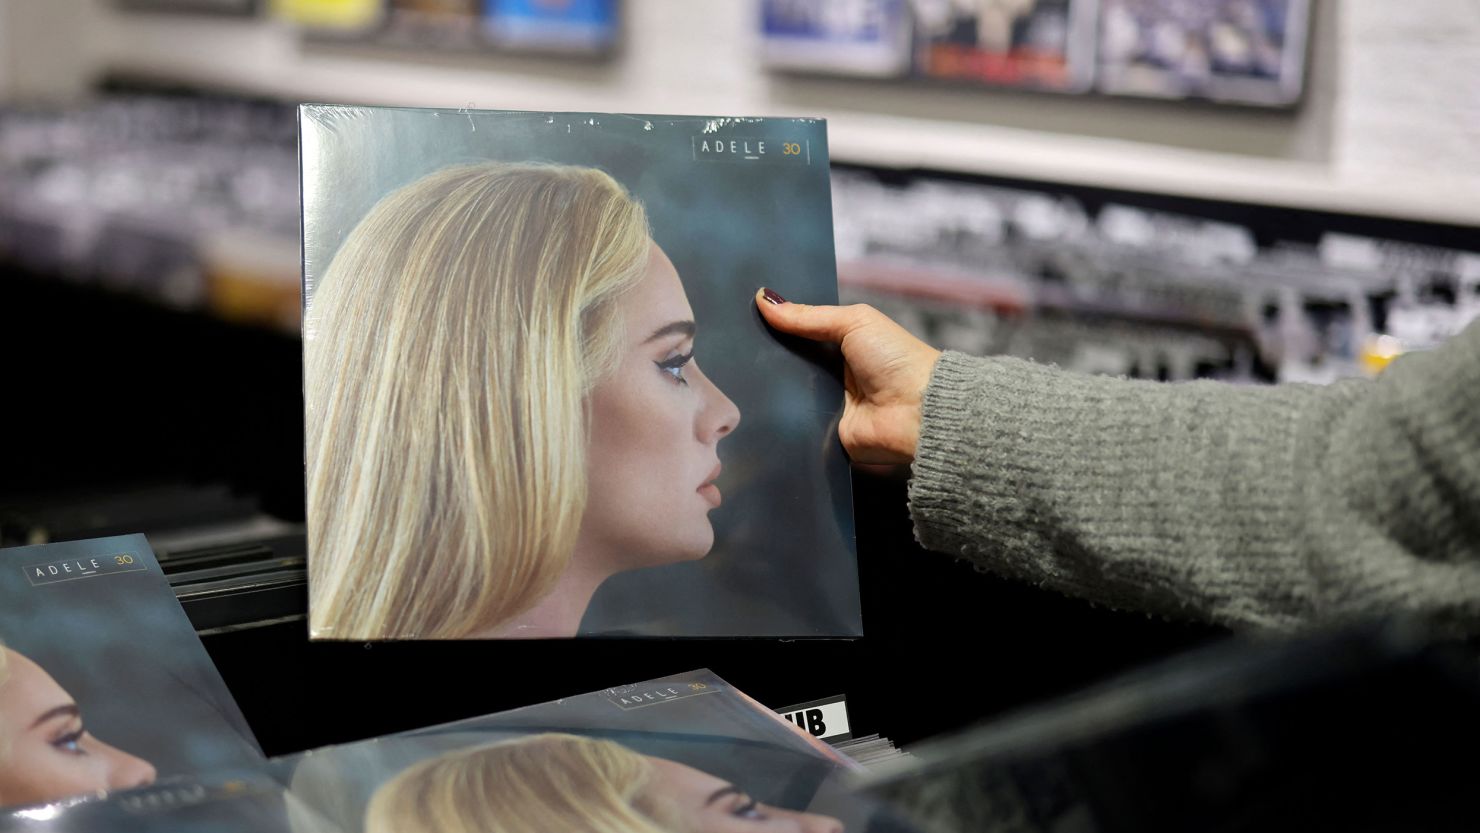 Driven by Adele, vinyl and CD sales both went up in 2021, data